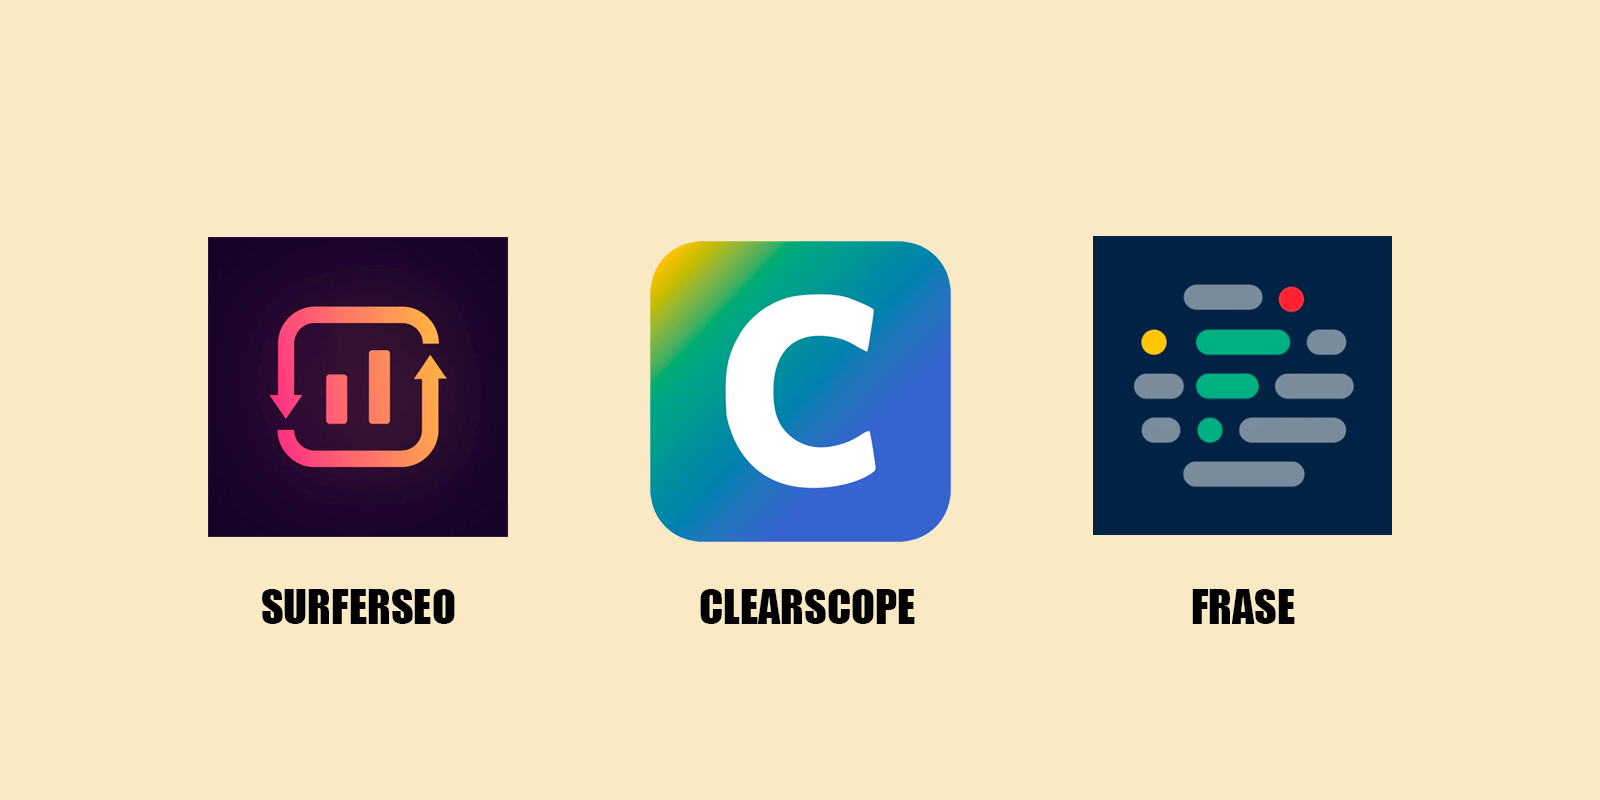 SurferSEO, Clearscope, and Frase App Logos in one image